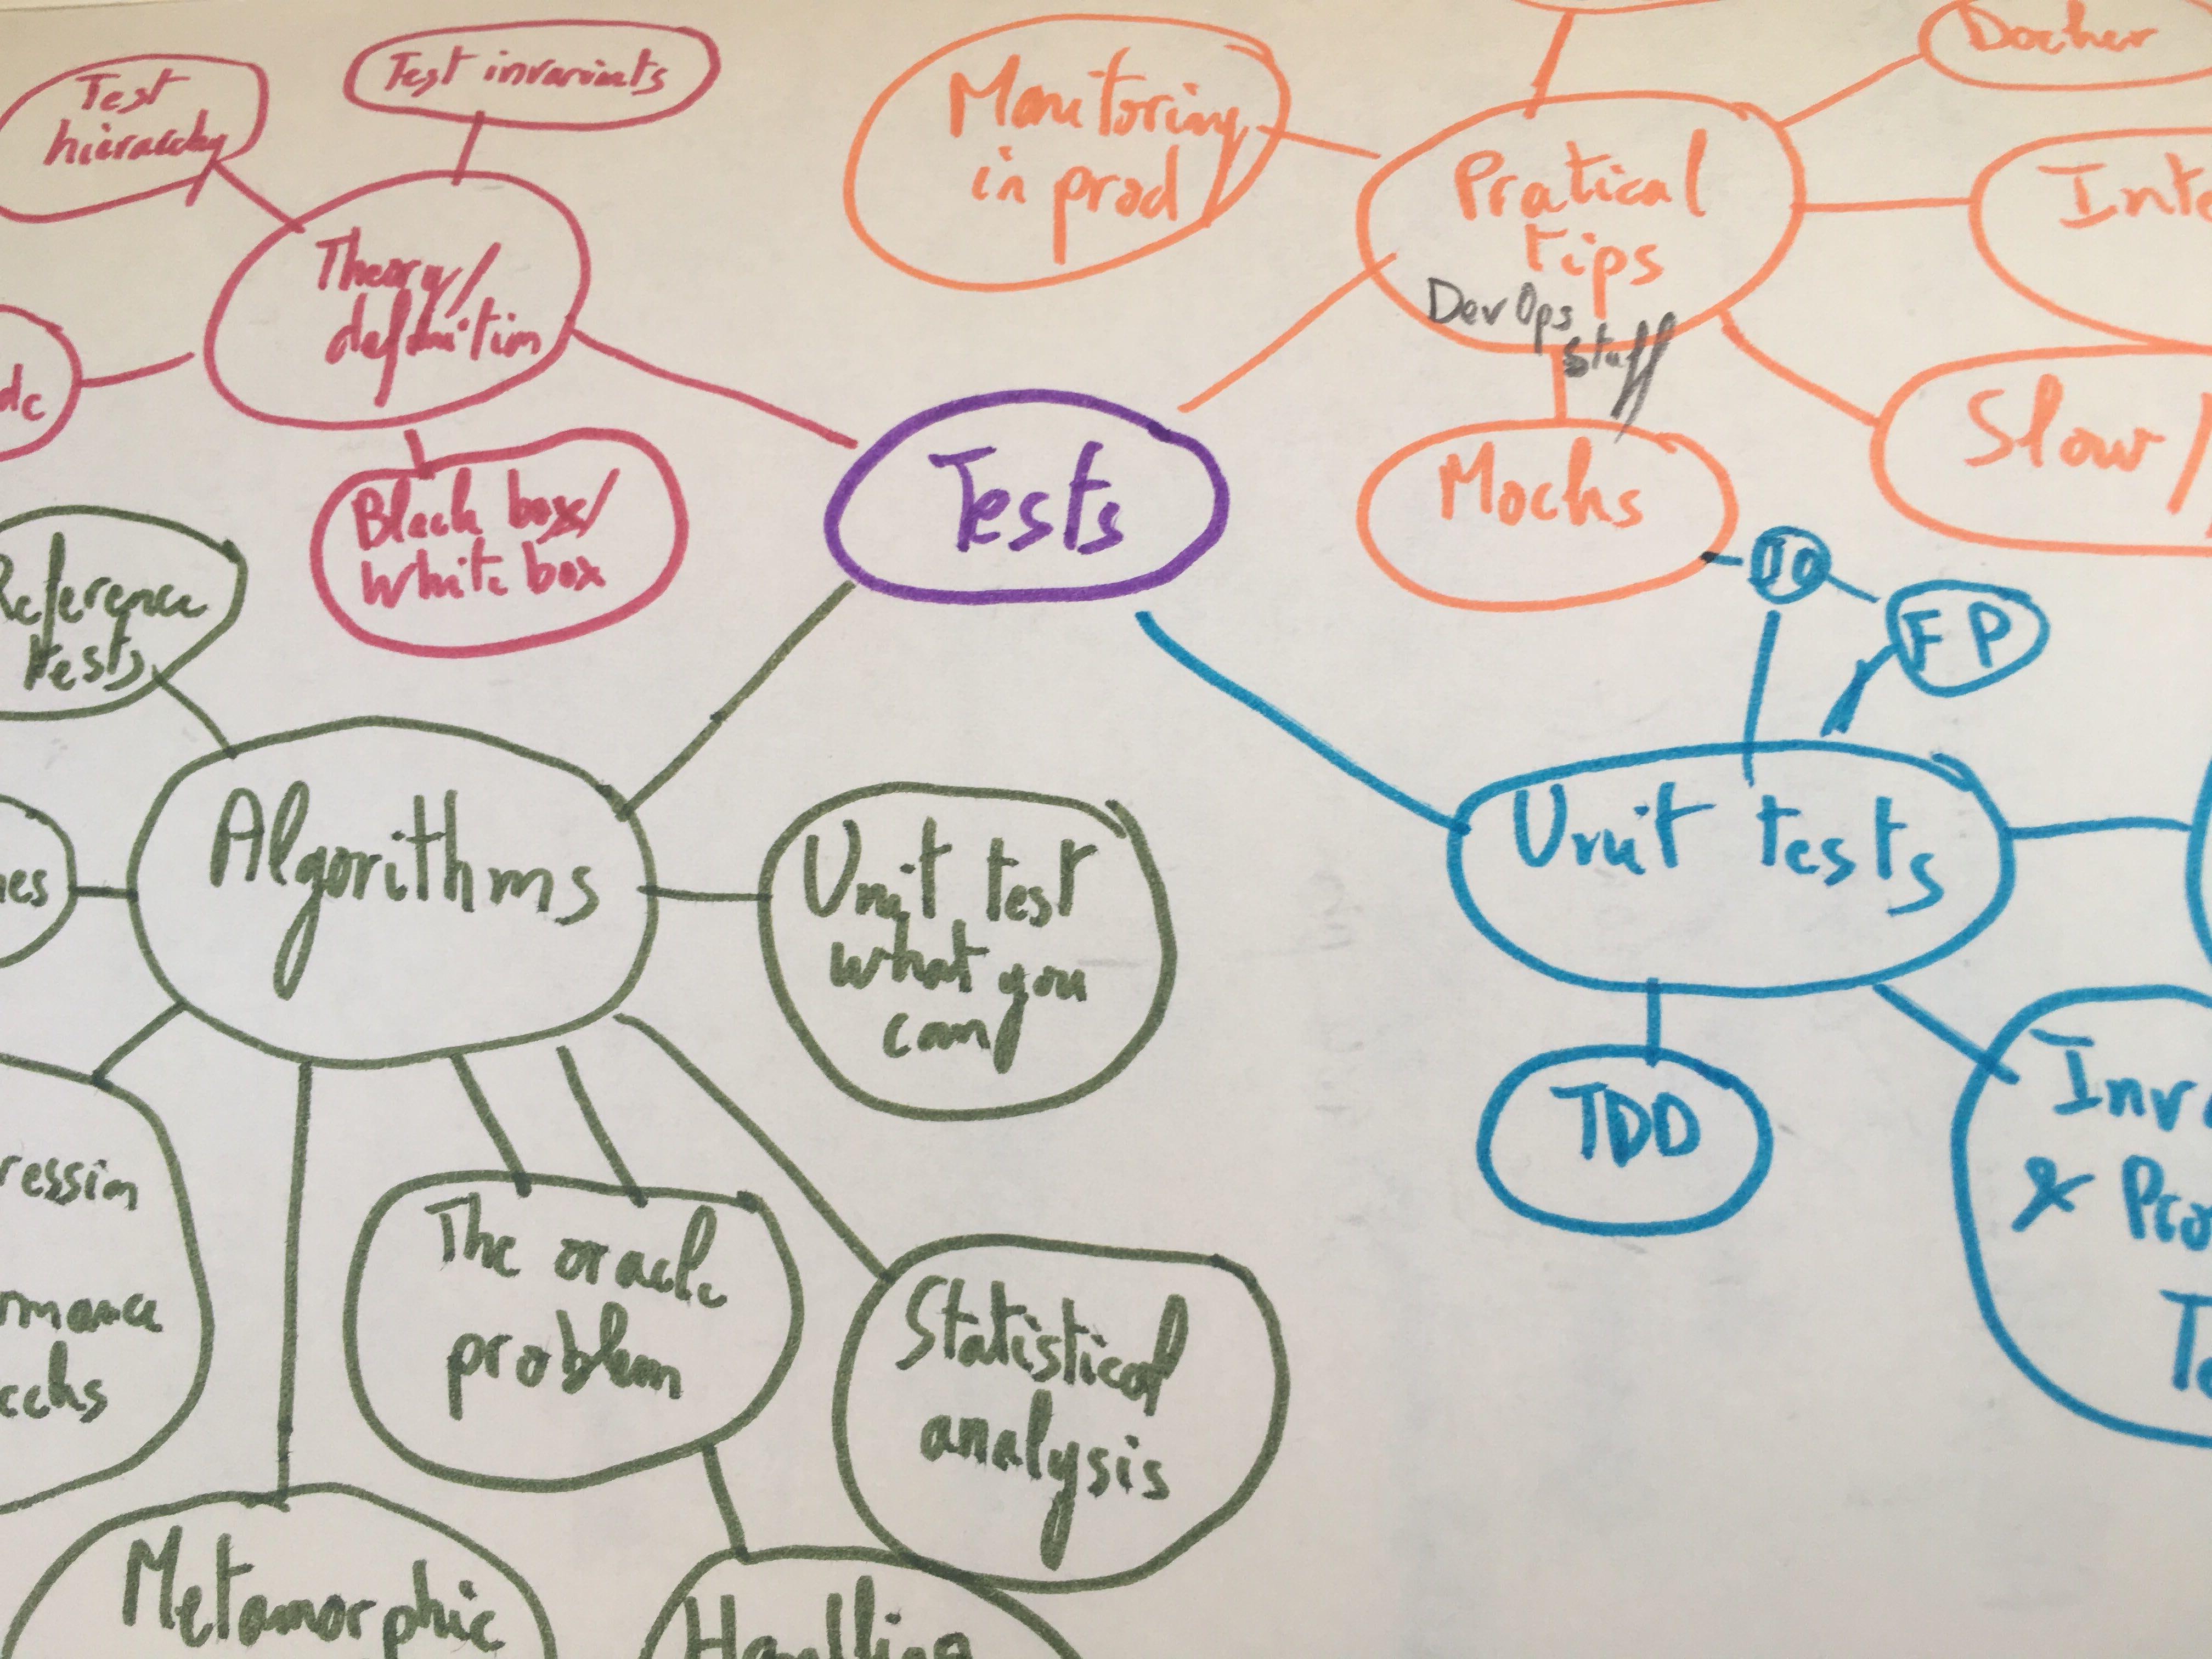 Mindmap of test-related topics